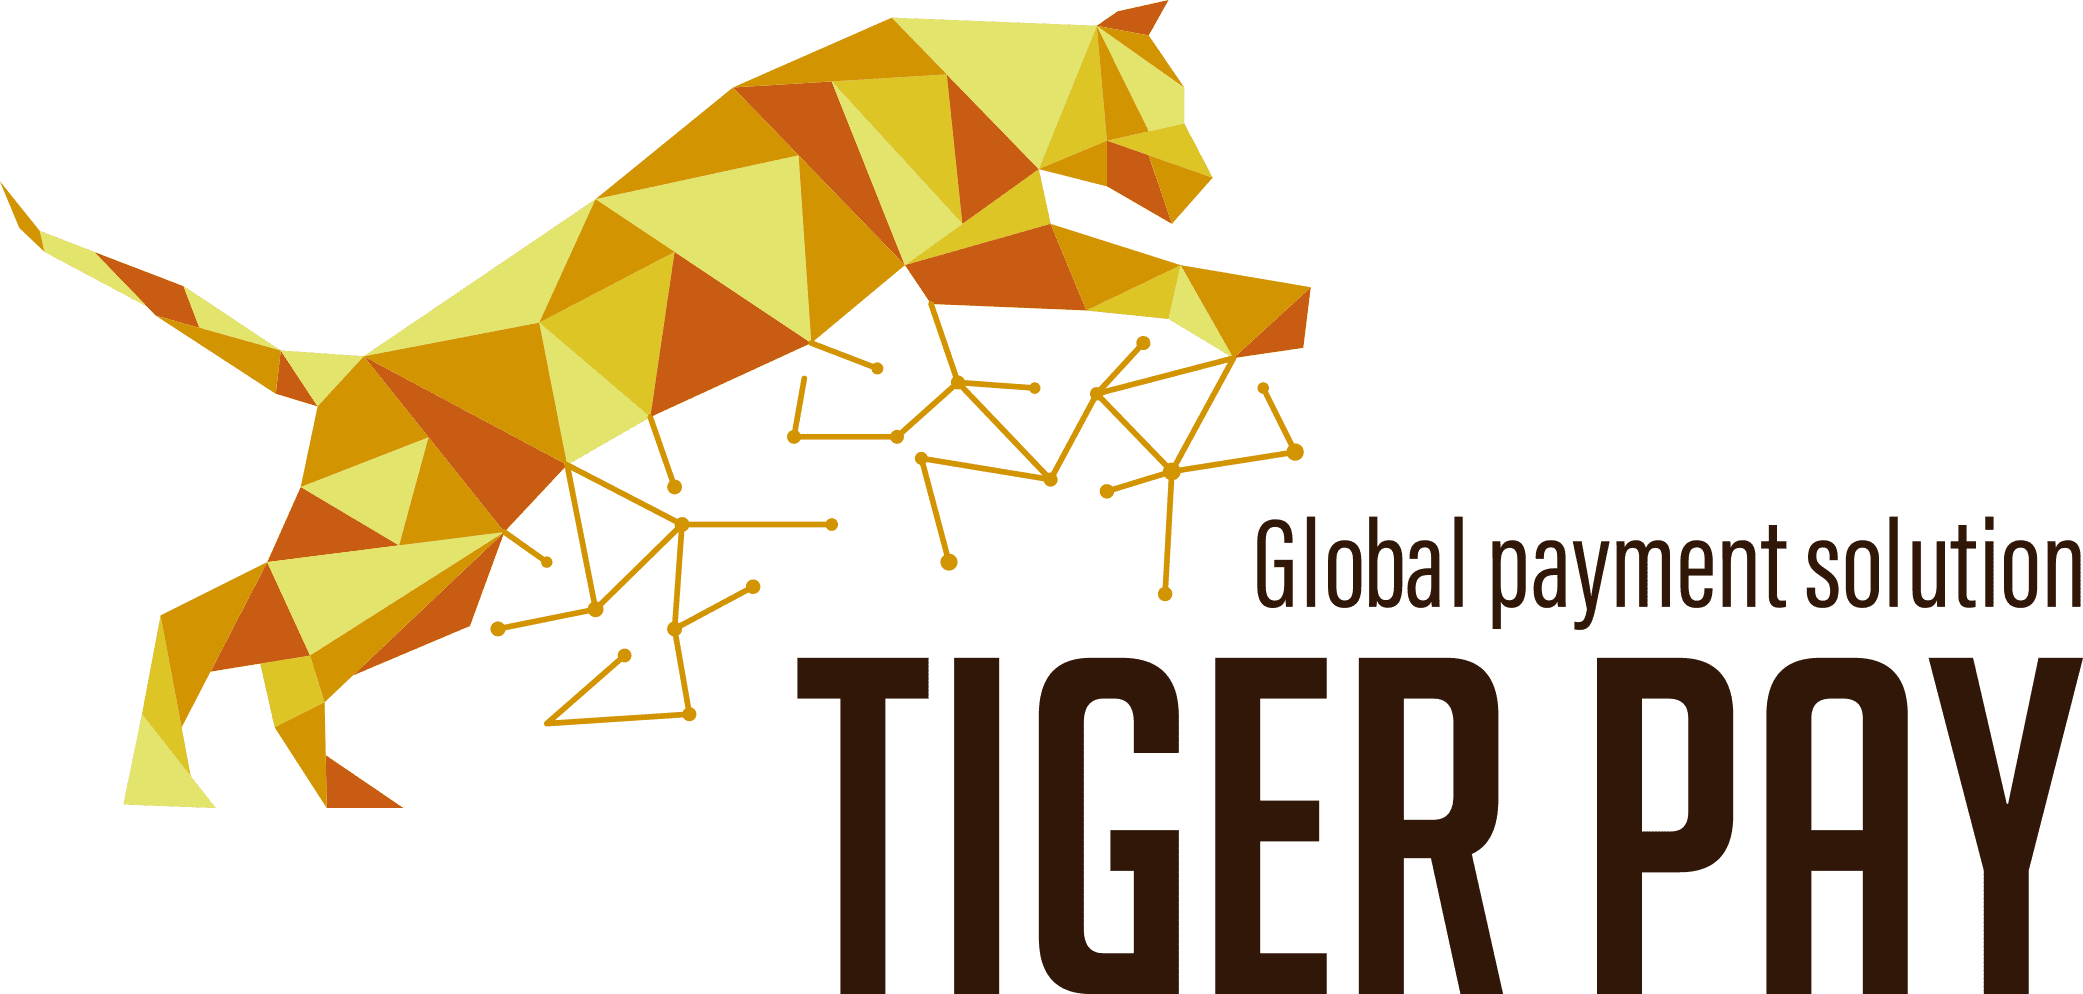 Featured image for “Tiger Pay　タイガーペイ”